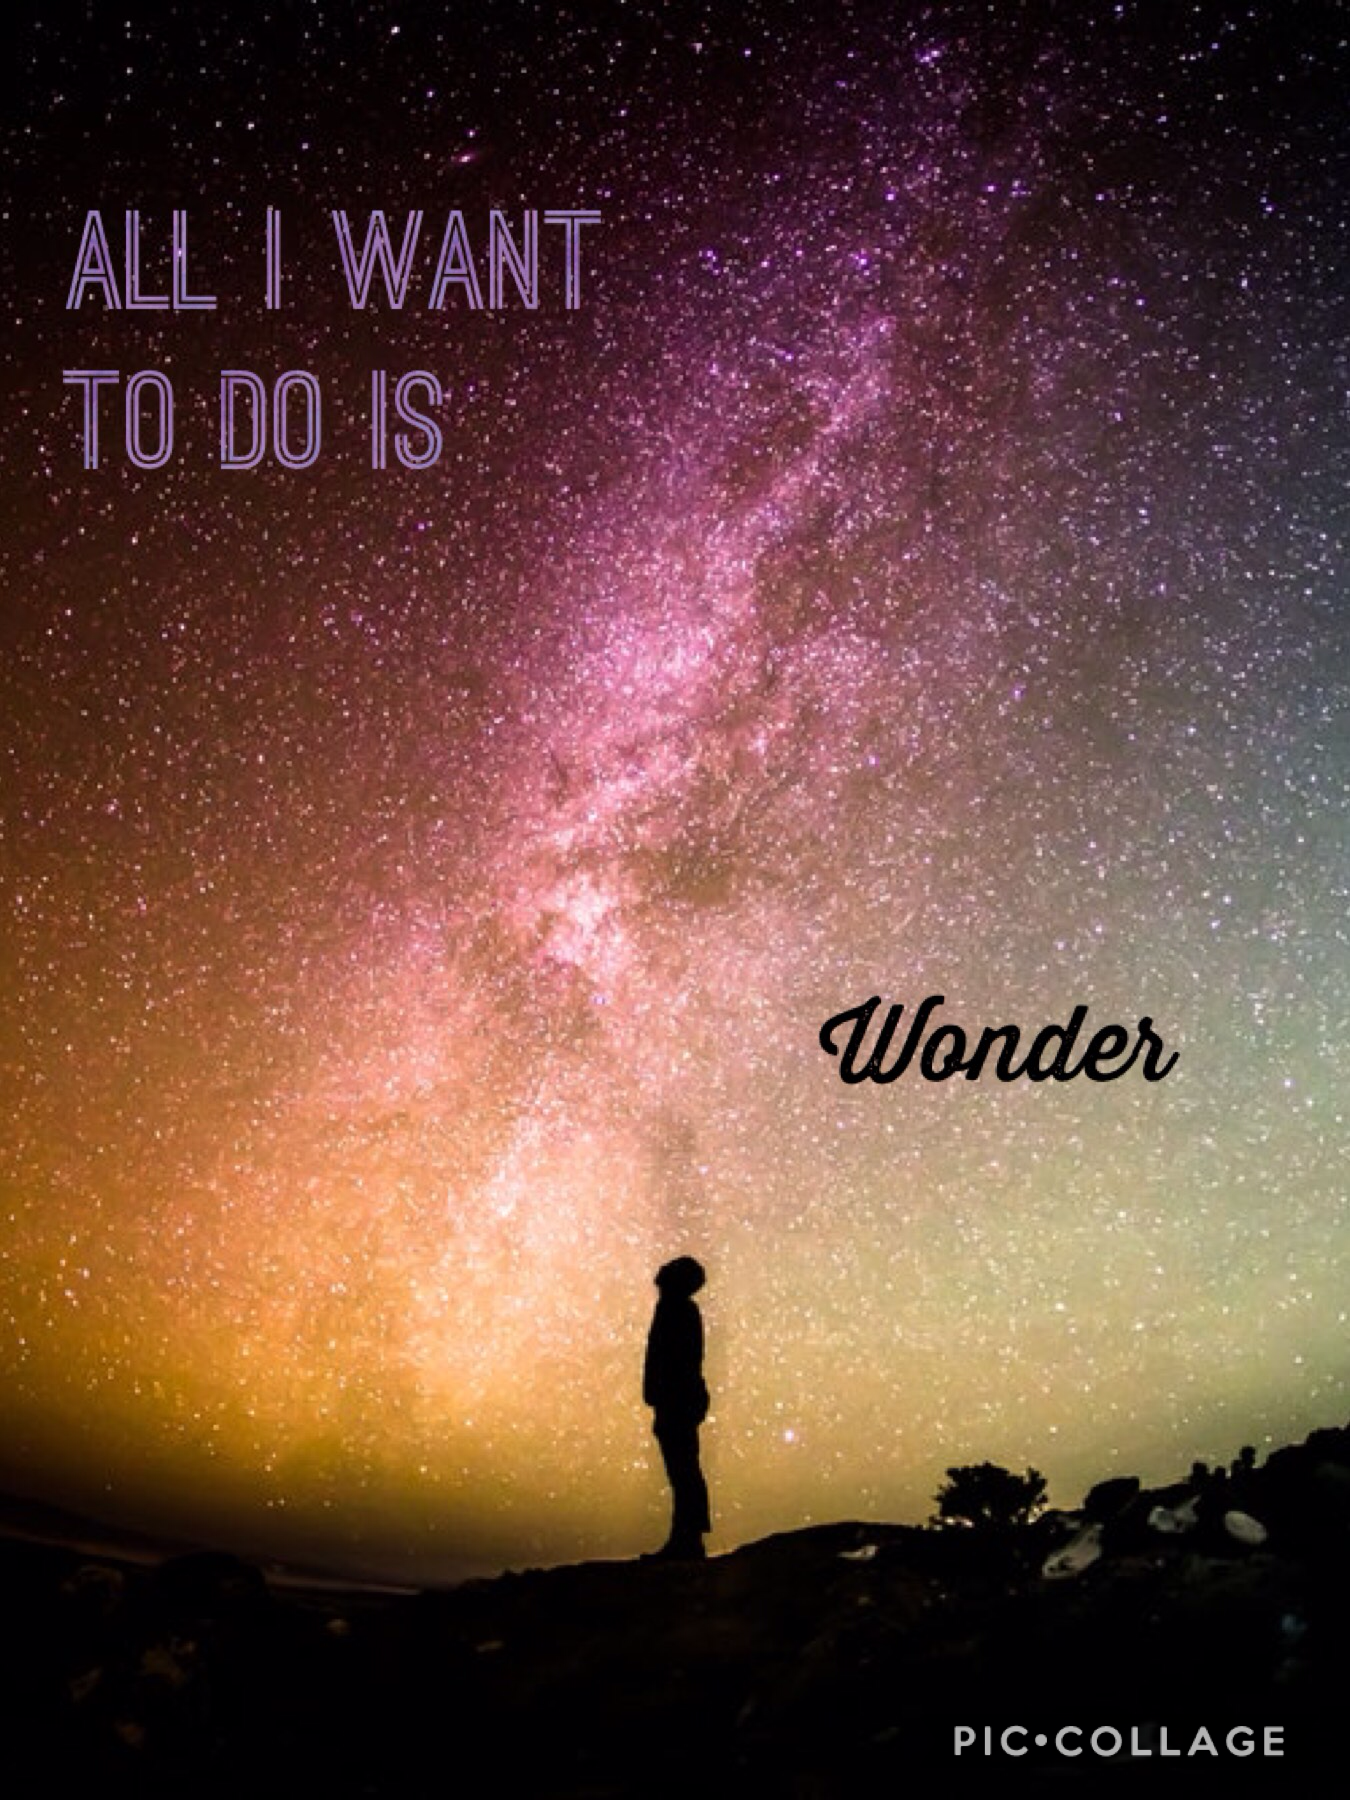 All I want to do is wonder
